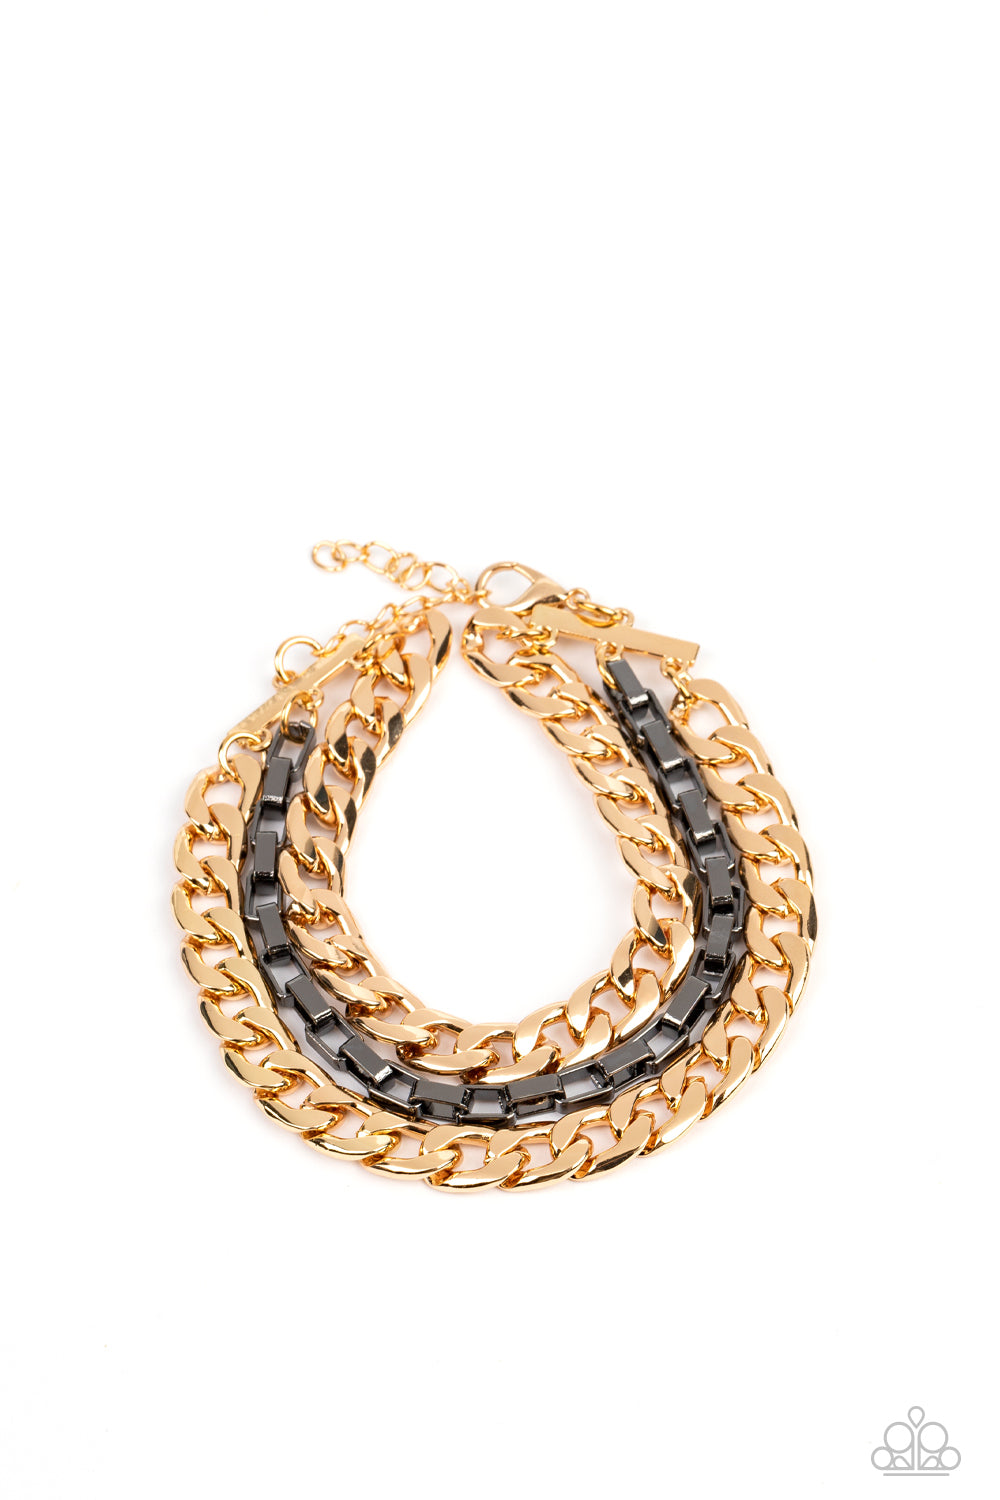 Paparazzi Accessories Heavy Duty - Multi Glistening gold and gunmetal curb and box chains wrap around the wrist for a grungy, industrial look. Features an adjustable clasp closure. Sold as one individual bracelet. Jewelry